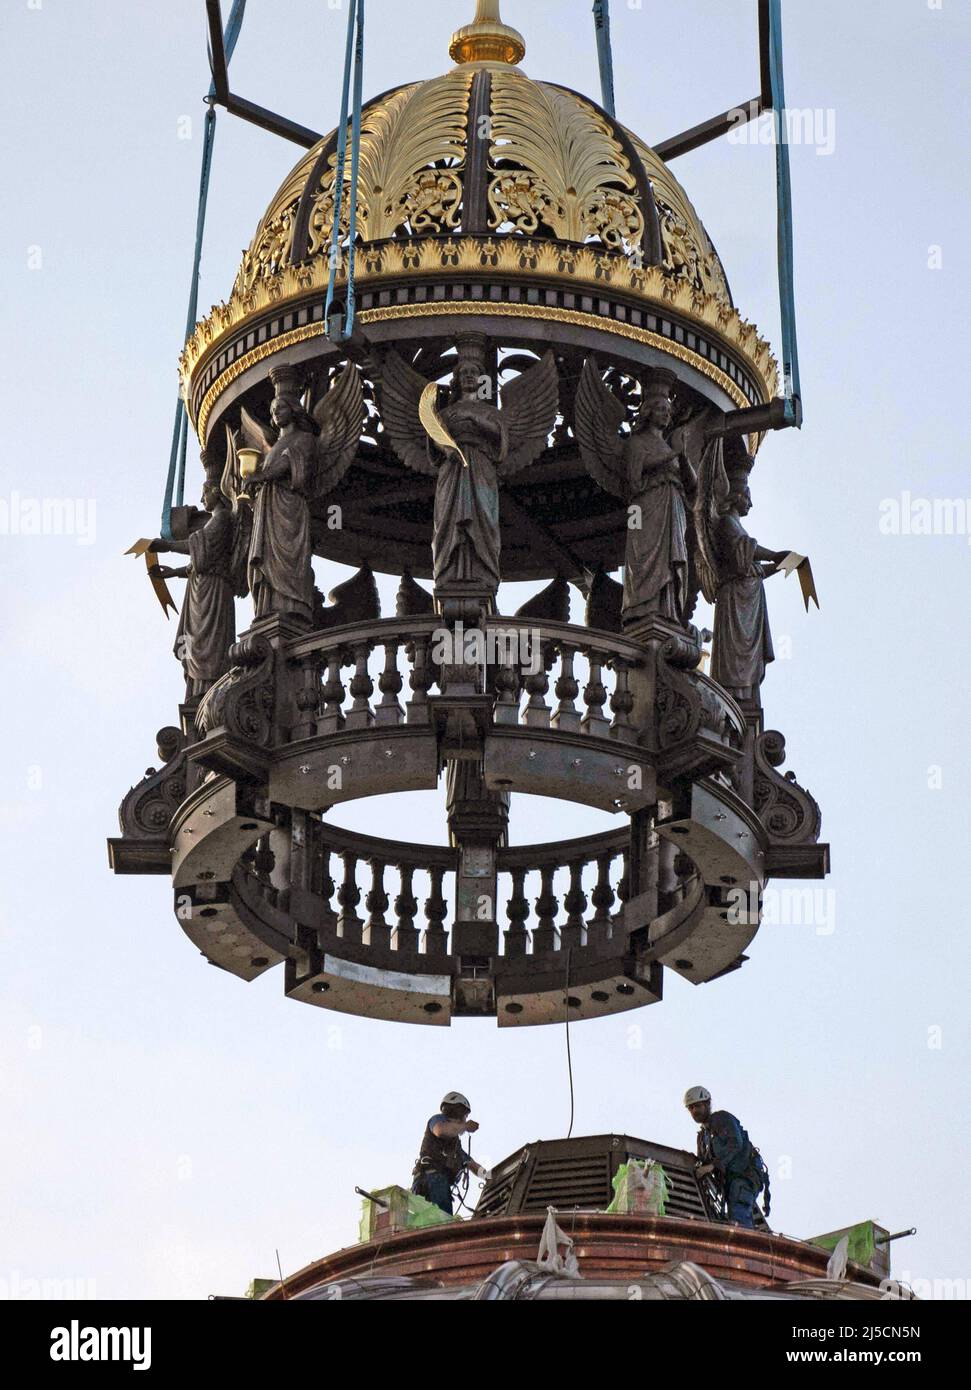 Germany, Berlin, 29.05.2020. Construction site of the Berlin Palace on 29.05.2020. Putting the dome lantern on the dome of the Berlin Palace. [automated translation] Stock Photo